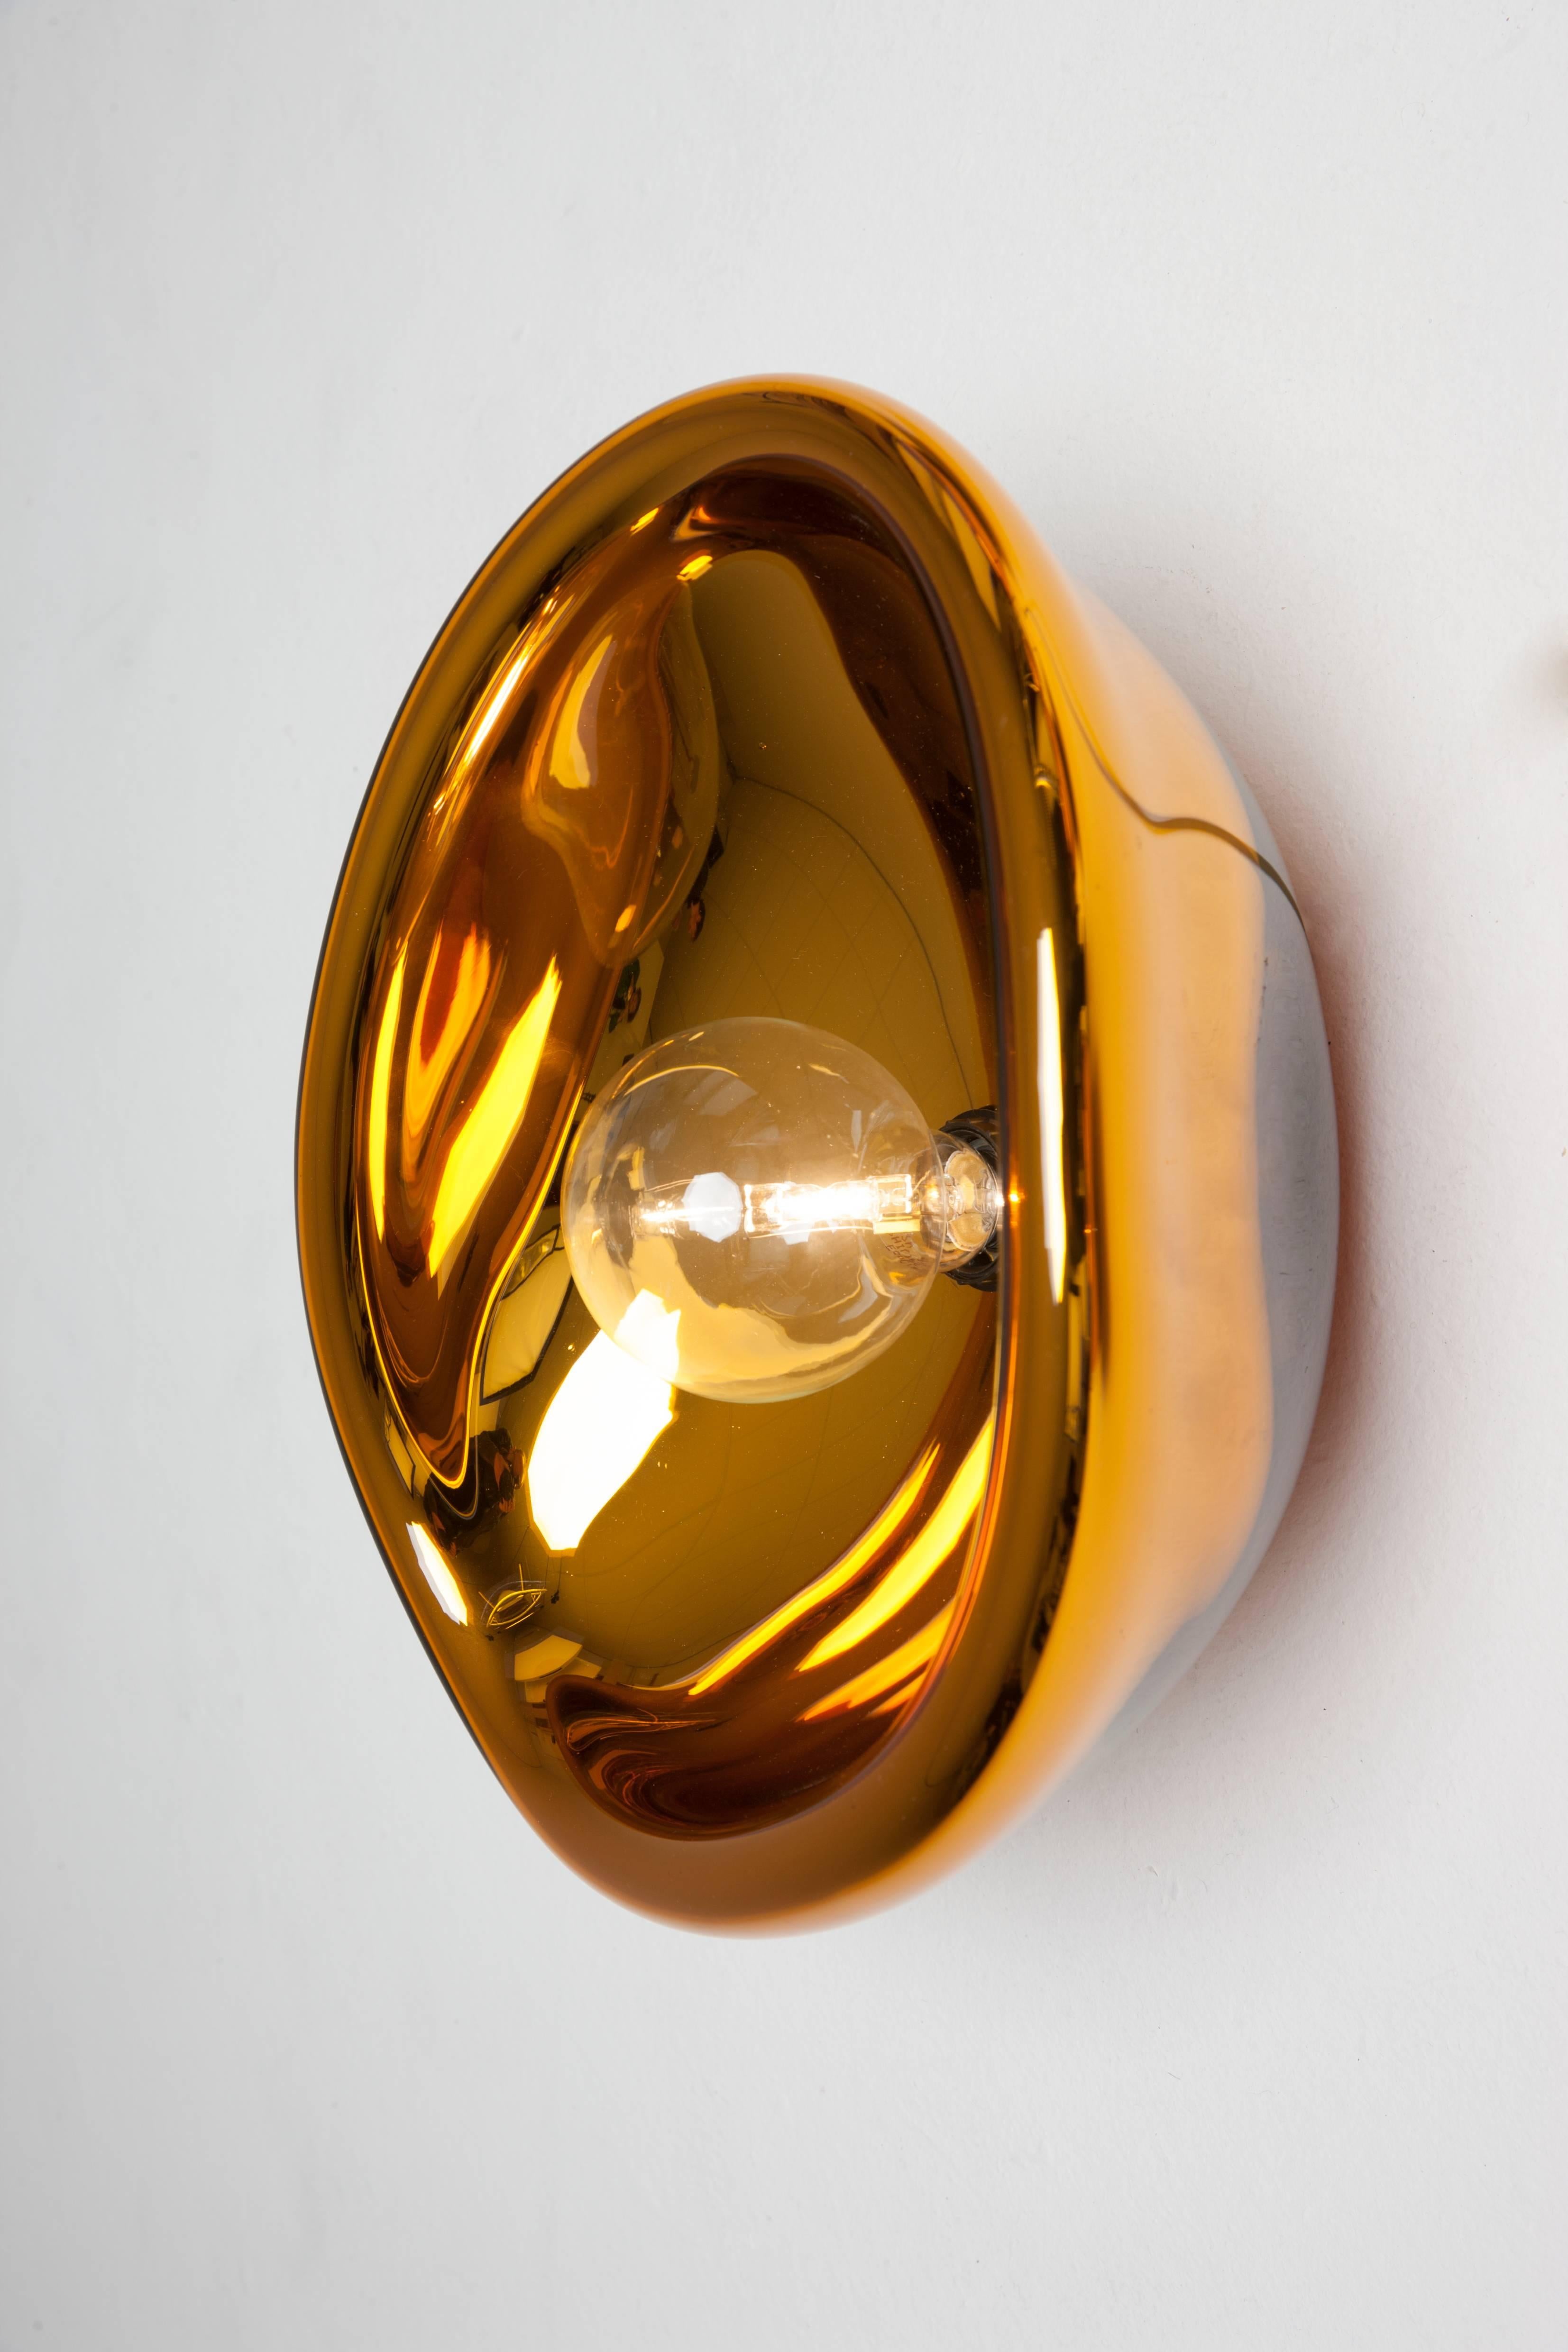 Big aurum gold glass sconce, Alex de Witte
Gold Big Sconce
Dimensions: 30 x 40 

Aurum shows how Alex de Wite is able to convey movement within a frozen form. As glass is liquid and filled with air while producing, he has captured different